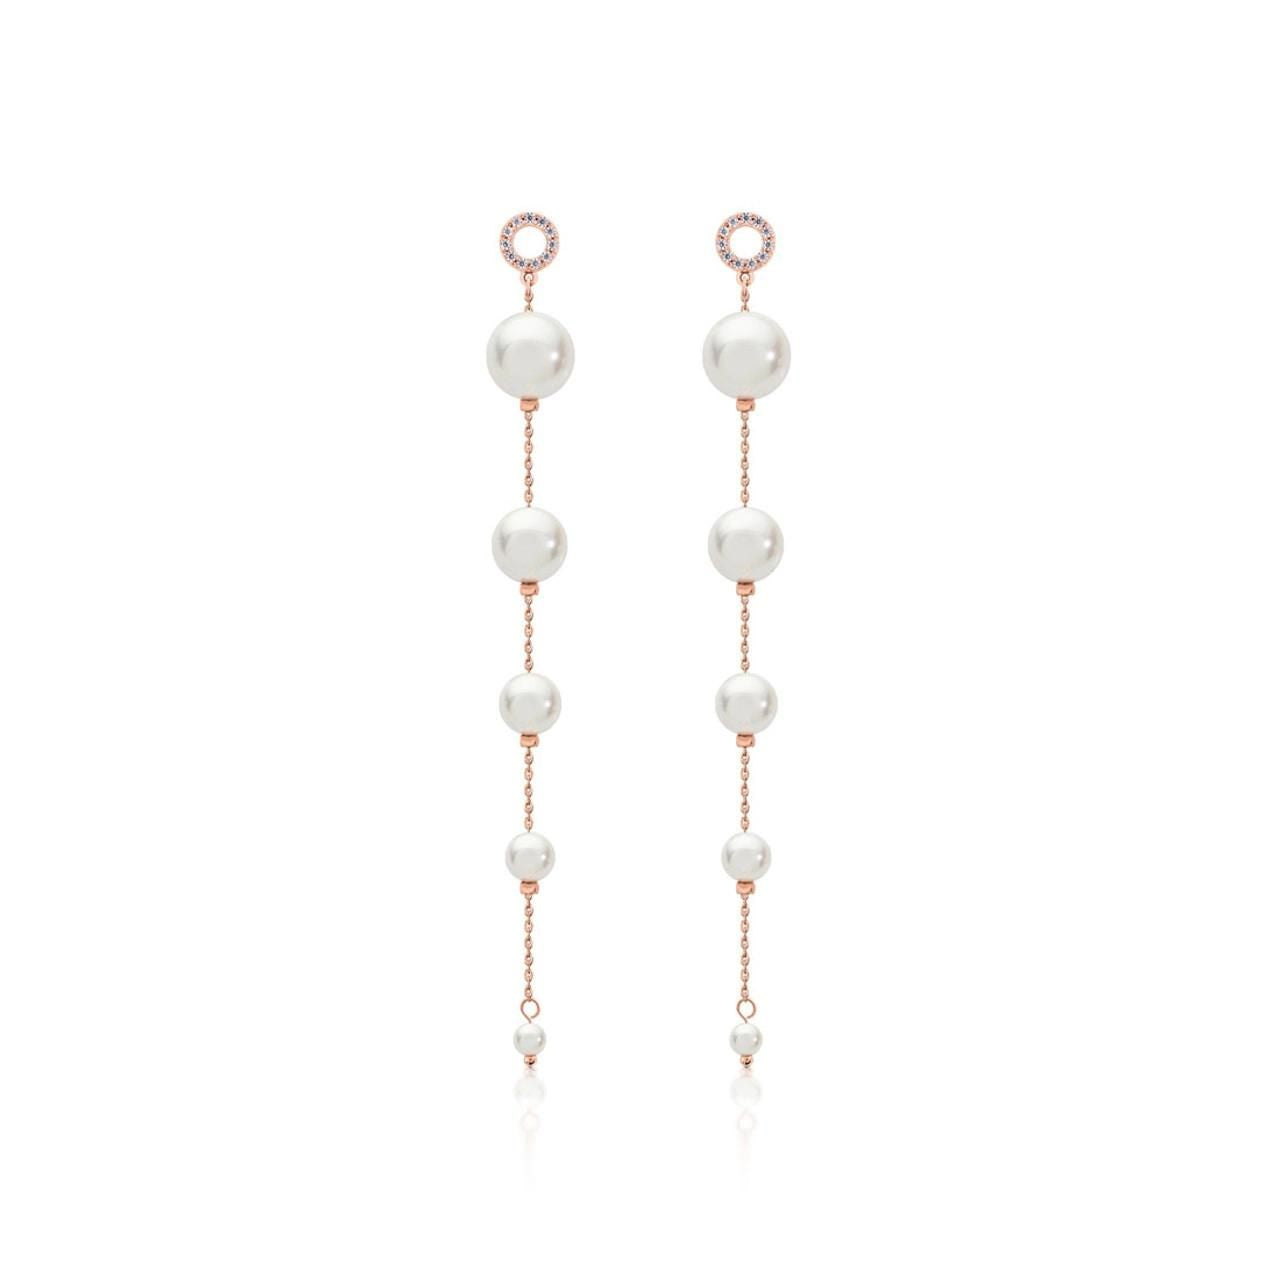 Romi Dublin Rose Gold Drop Pearl Earrings  The classics are what draw us back time and time again and nothing is more classic than Pearls. We were inspired with this collection to bring a modern twist to a timeless classic.